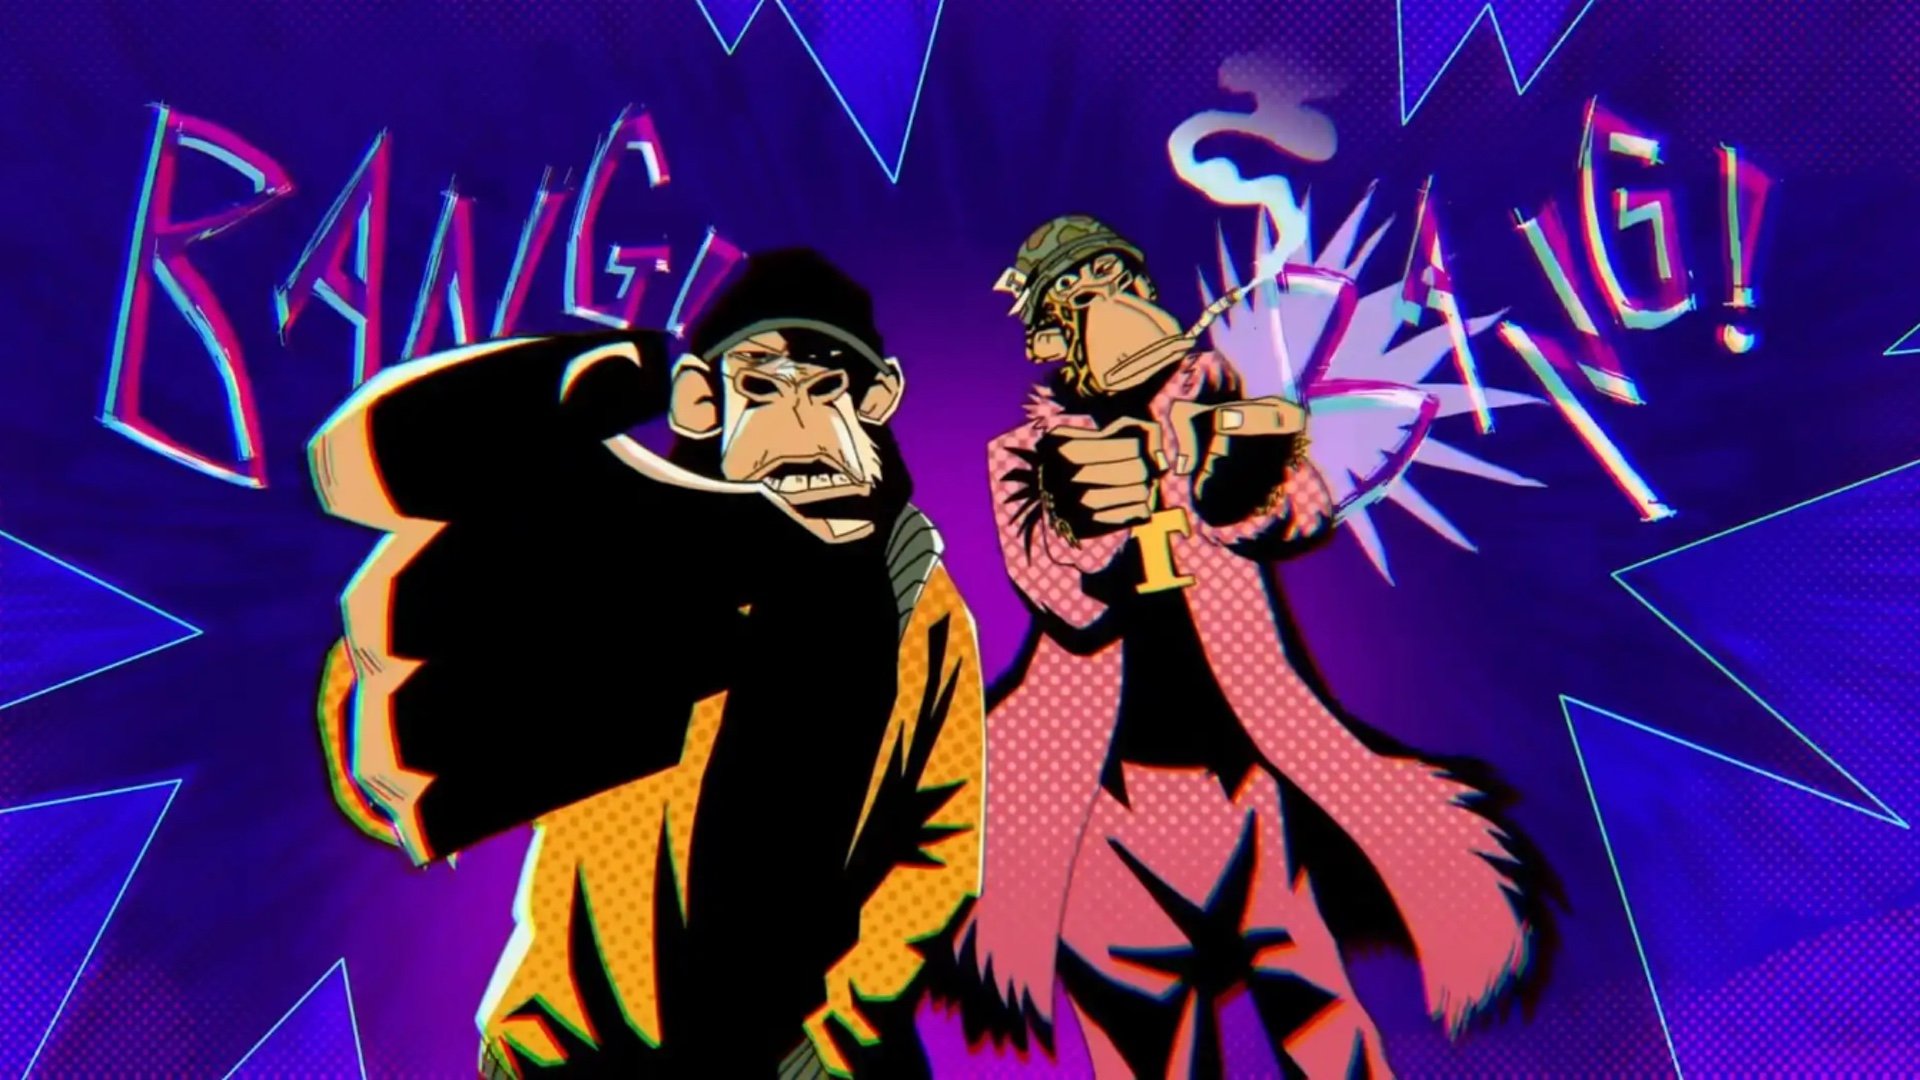 Animated Music Video For Eminem and Snoop Dog's new Collaborative Song  “From The D 2 The LBC” — GeekTyrant